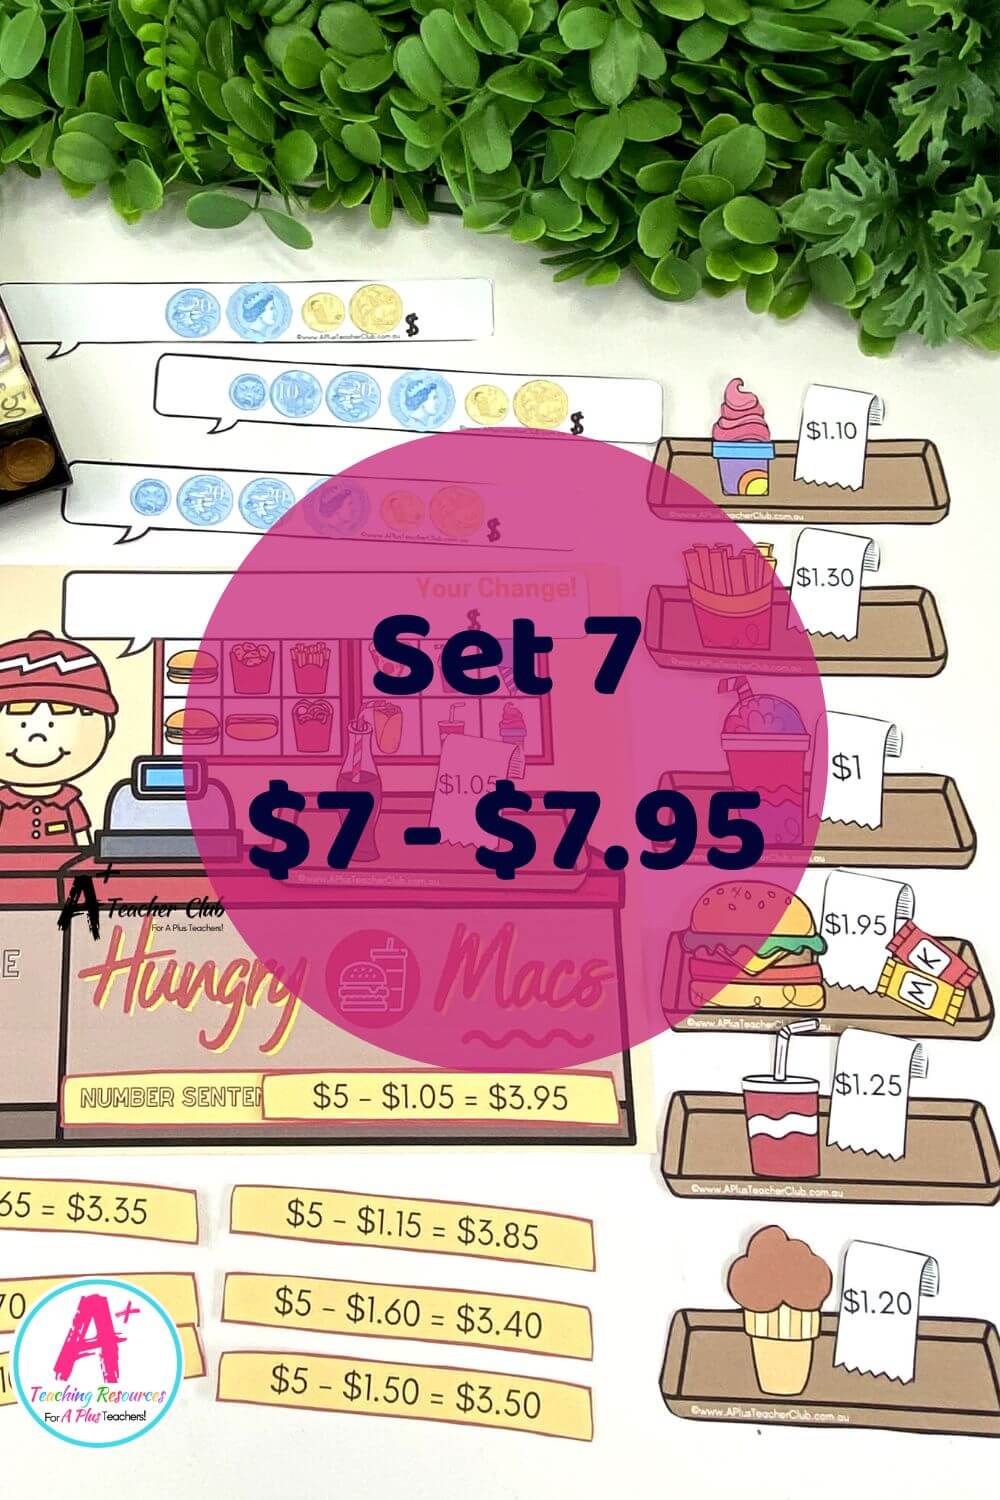 Counting Change Games - Fast Food Set 7 ($7-$7.95)